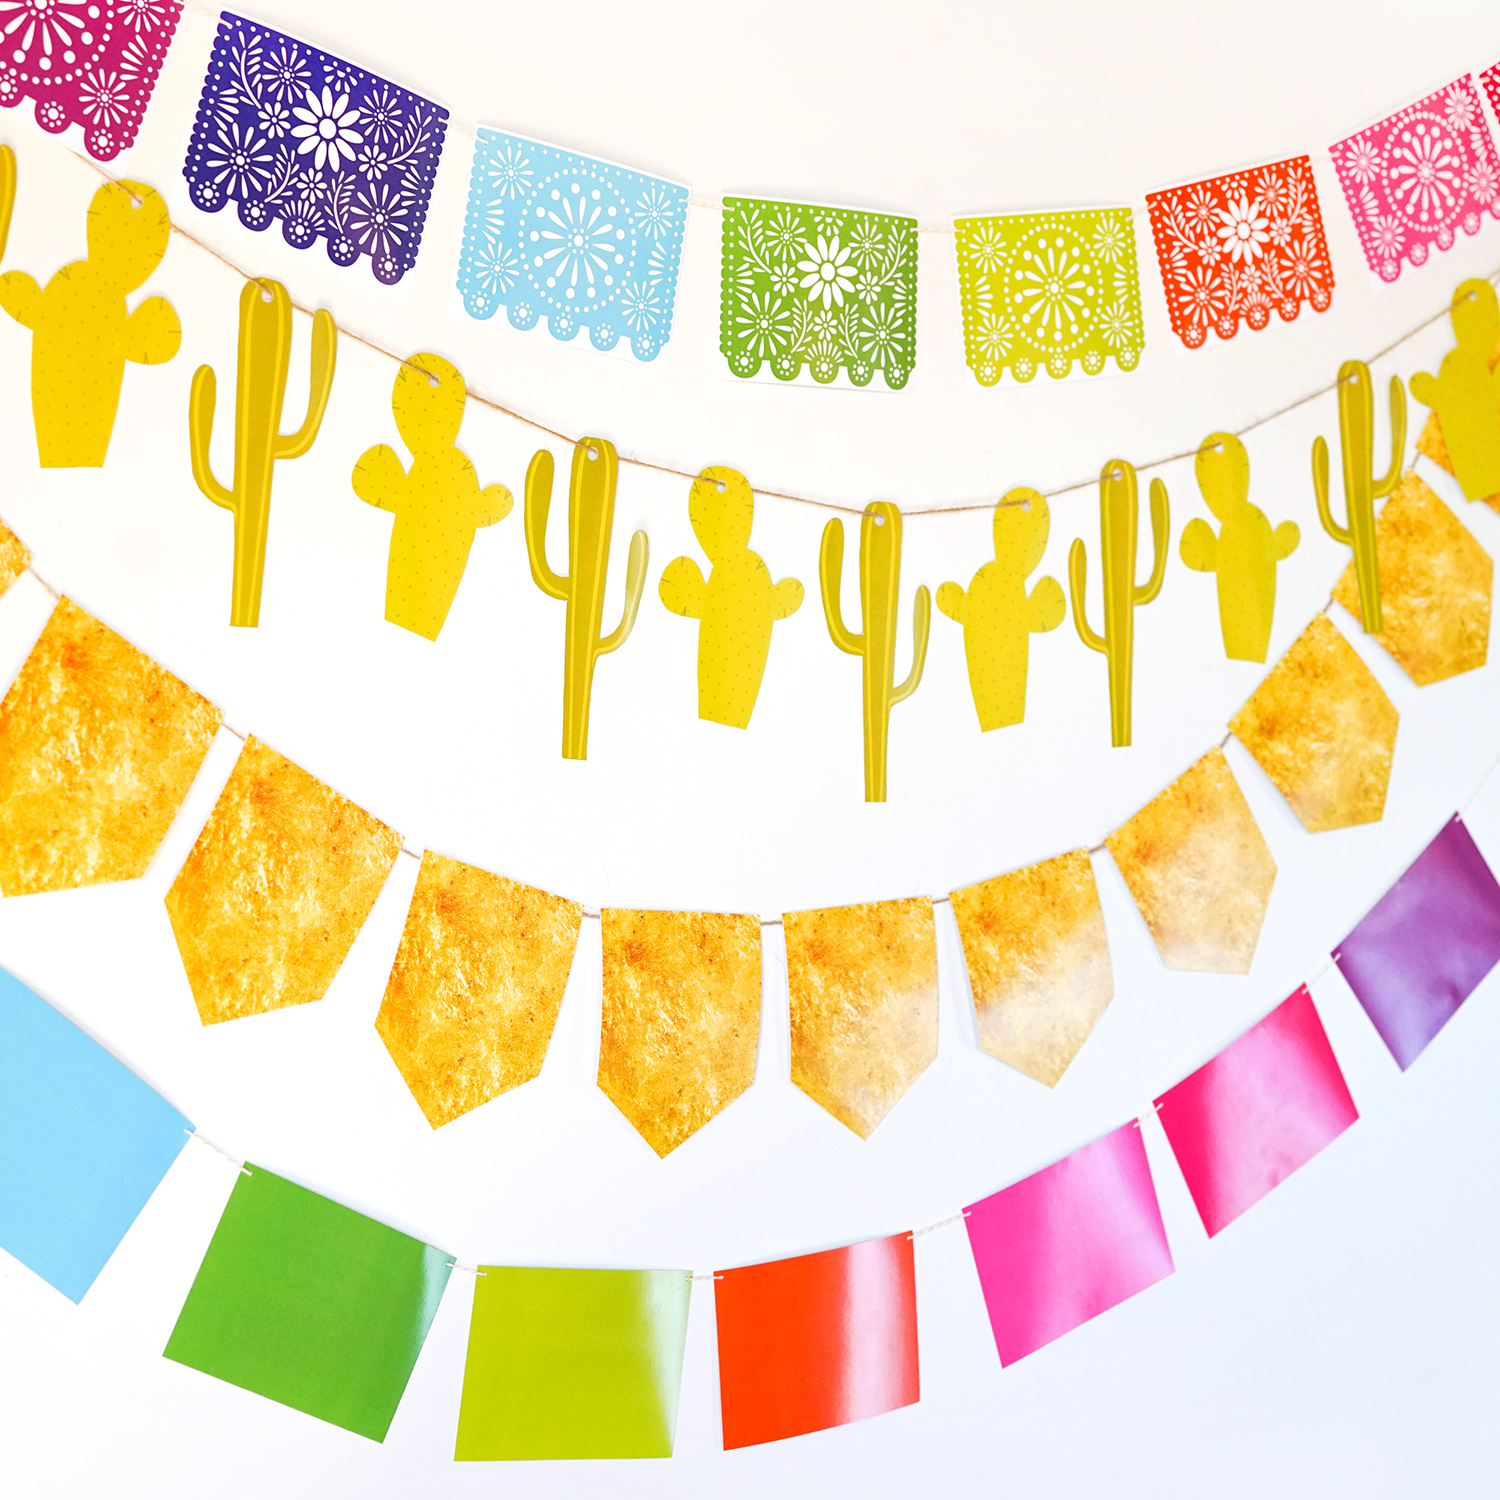 Four Fiesta Garland Printables - doily, cactus, gold pendant and color block.